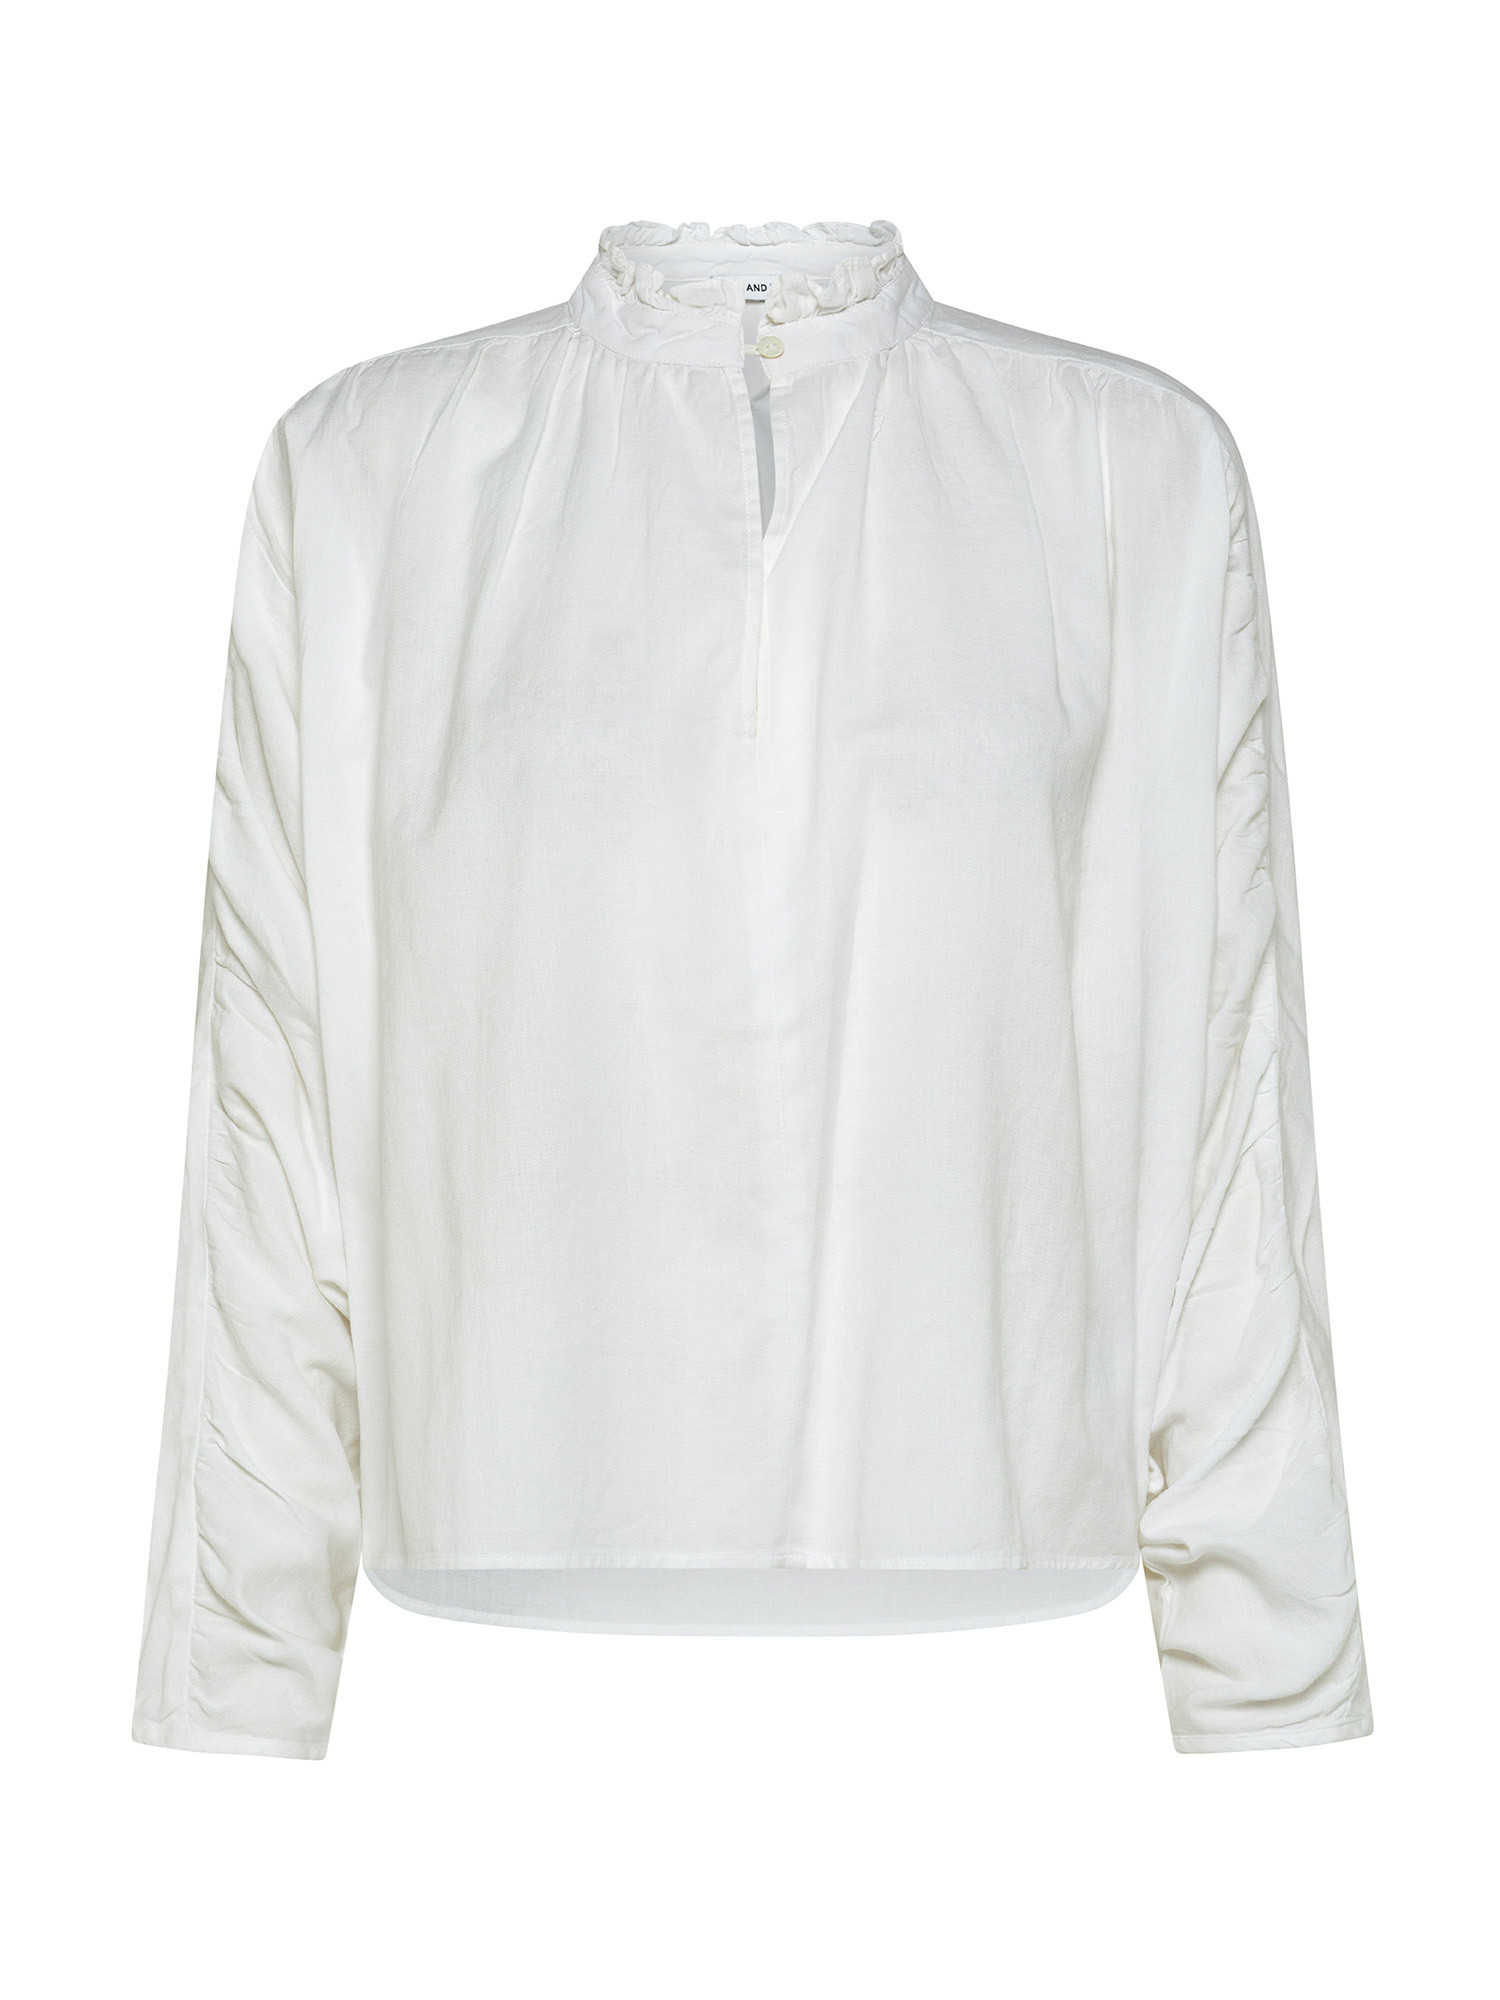 Blusa in cotone con maniche lunghe, Bianco, large image number 0